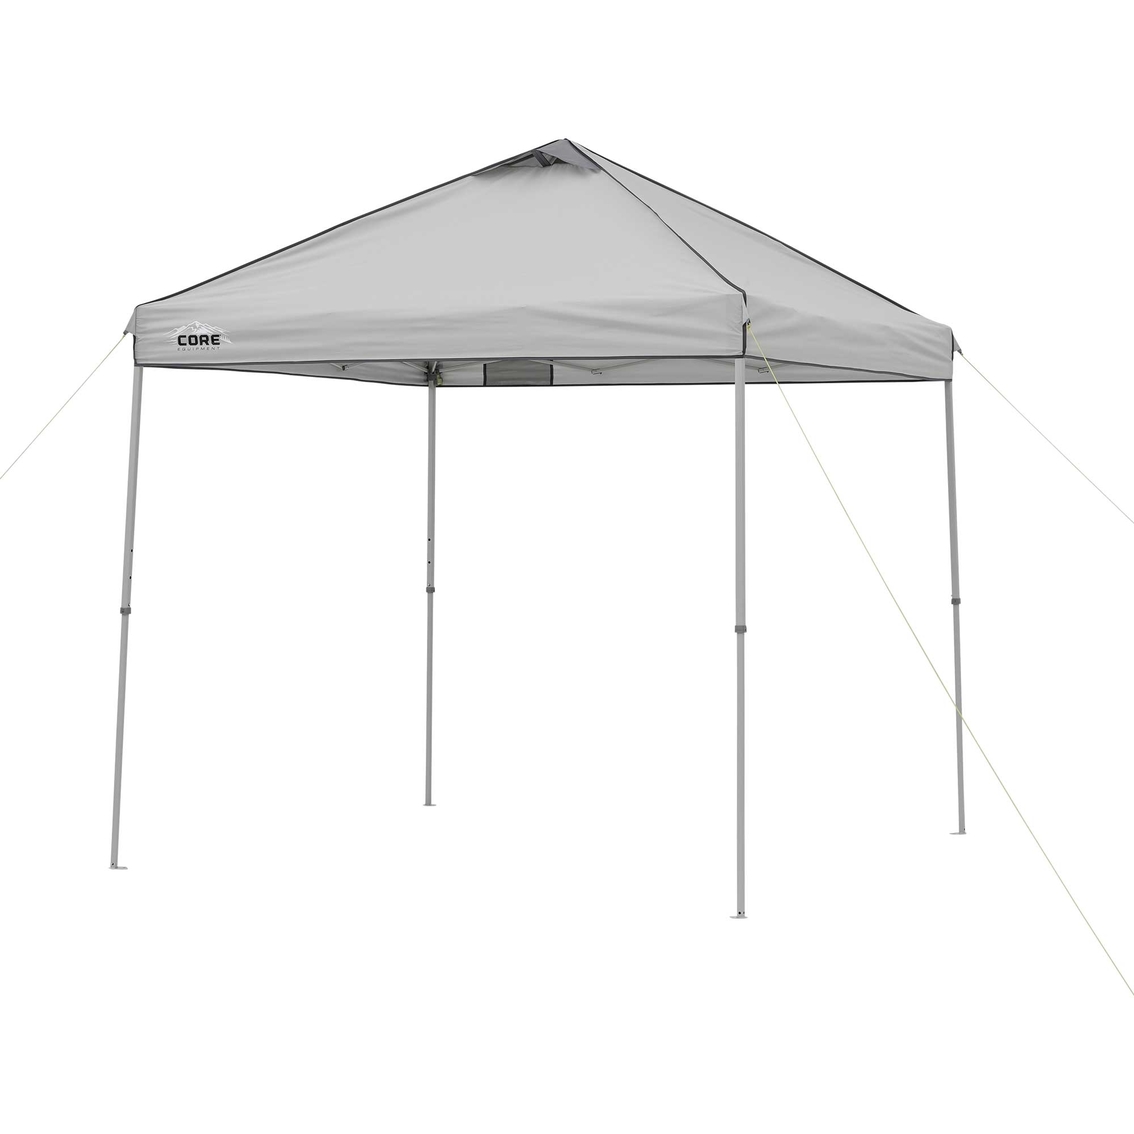 Core Equipment 8 x 8 ft. Instant Canopy